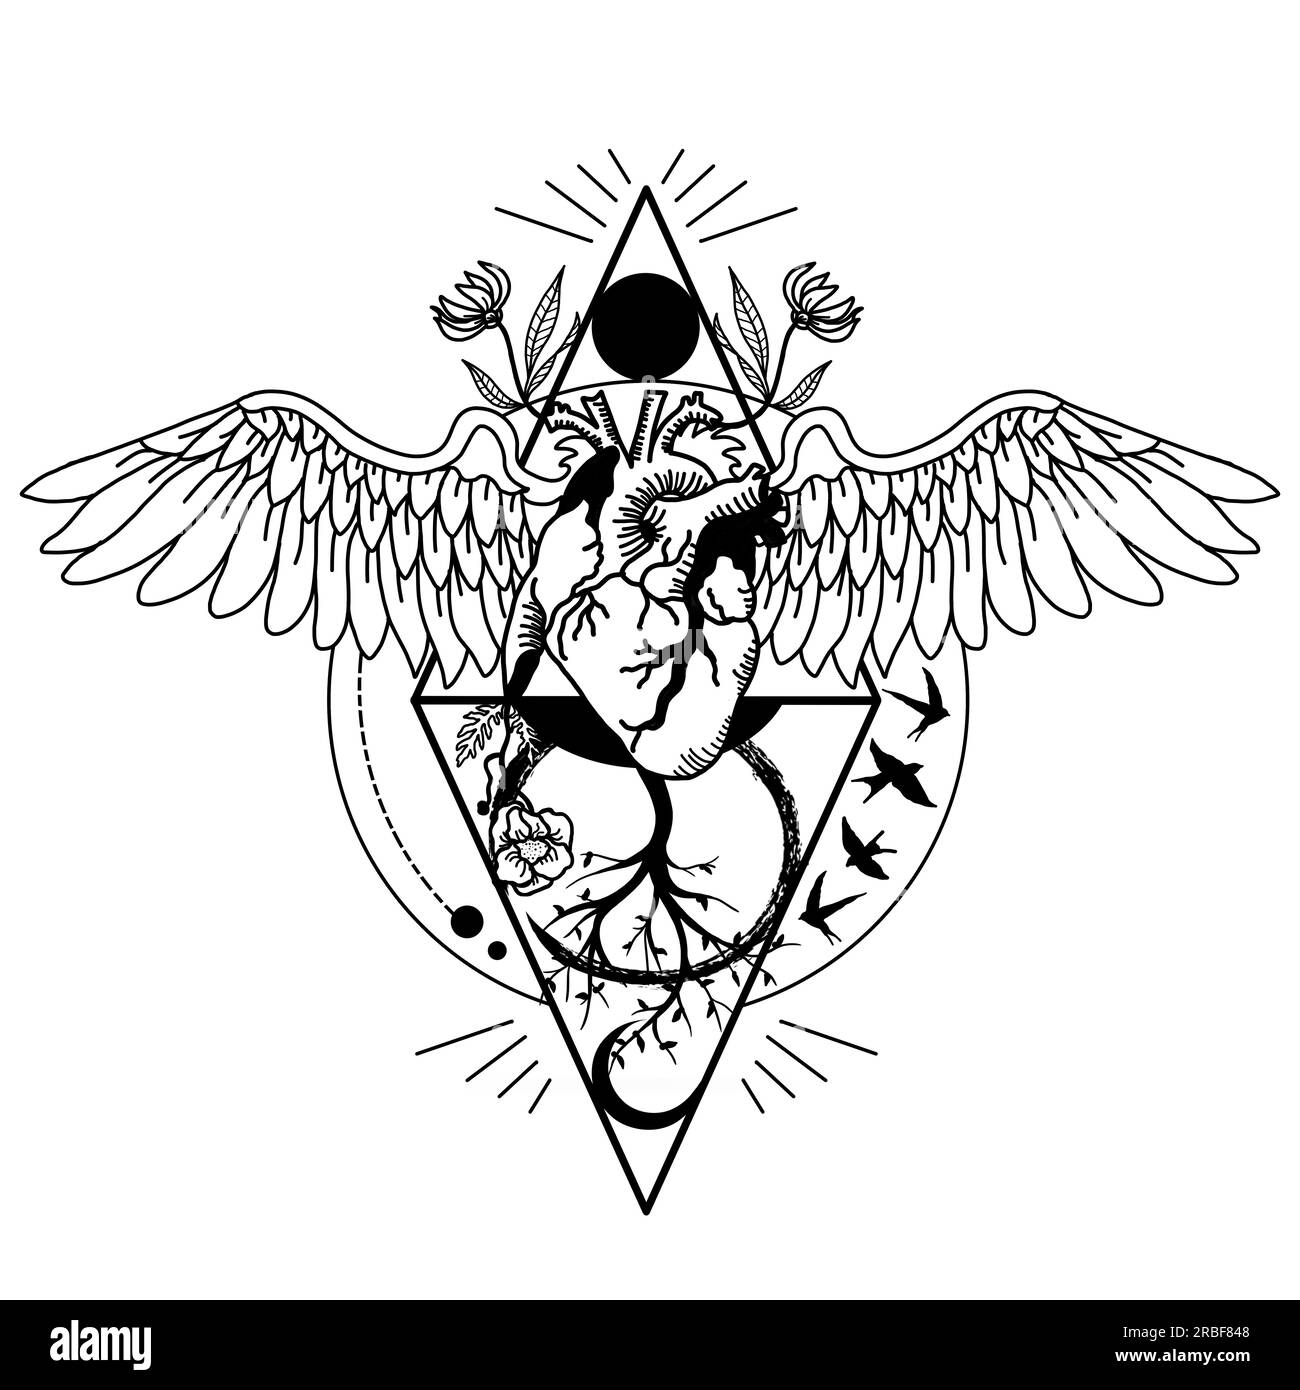 Line Art Winged Heart with Flowers Tattoo Illustration géométrique, Black and White Organ Heart with Wings Drawing, tatouage minimal au trait Banque D'Images